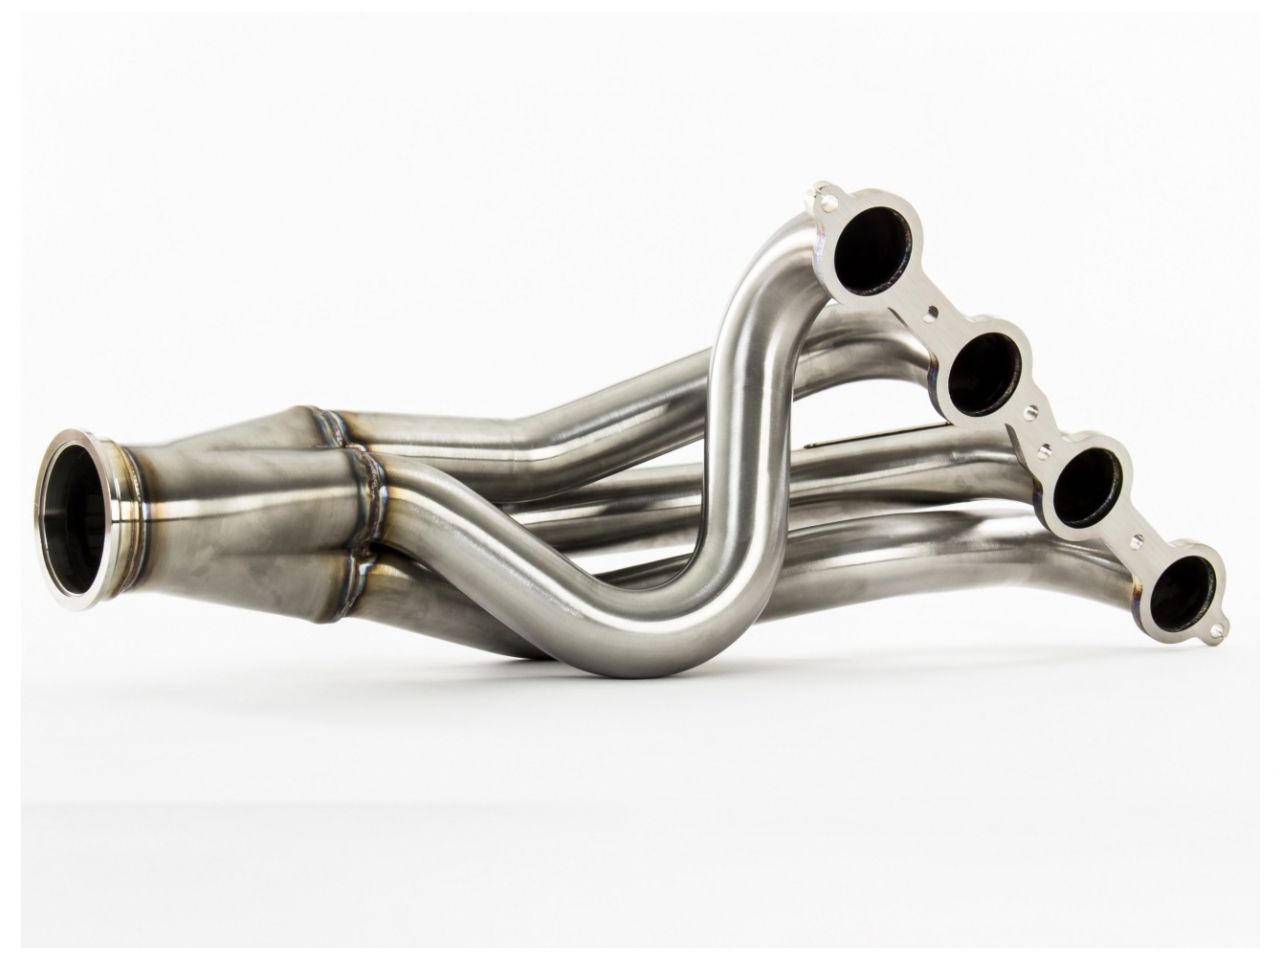 Sikky BMW E30 LS Swap Headers 1 7/8" Stainless Steel